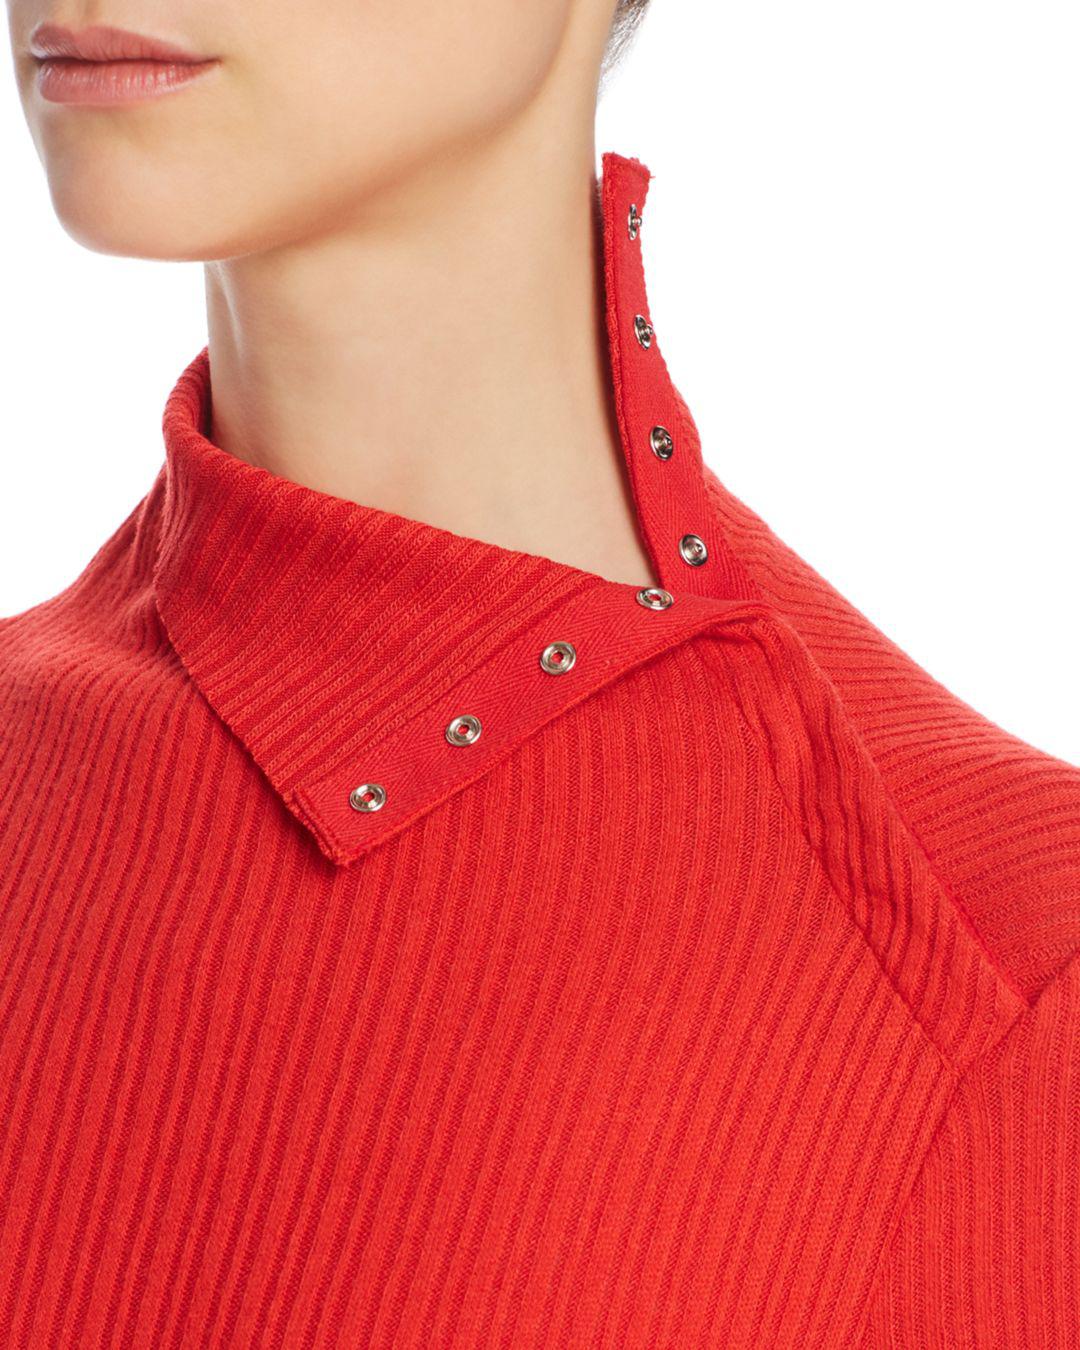 Enza Costa Ribbed Turtleneck Top in Red - Lyst